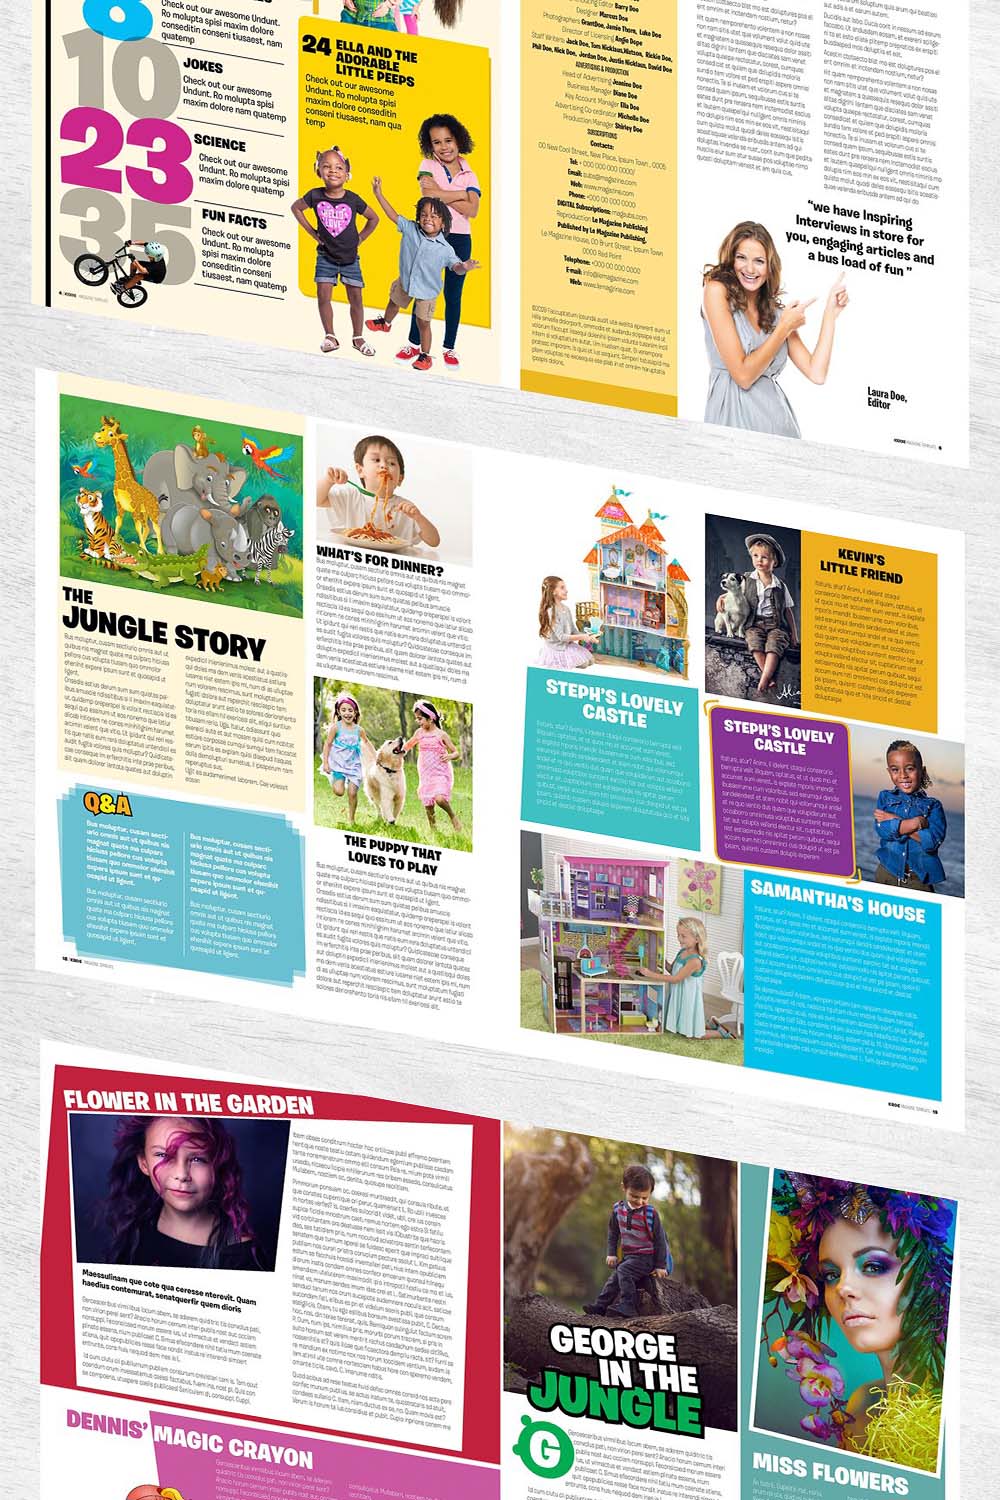 Preview of magazine pages.